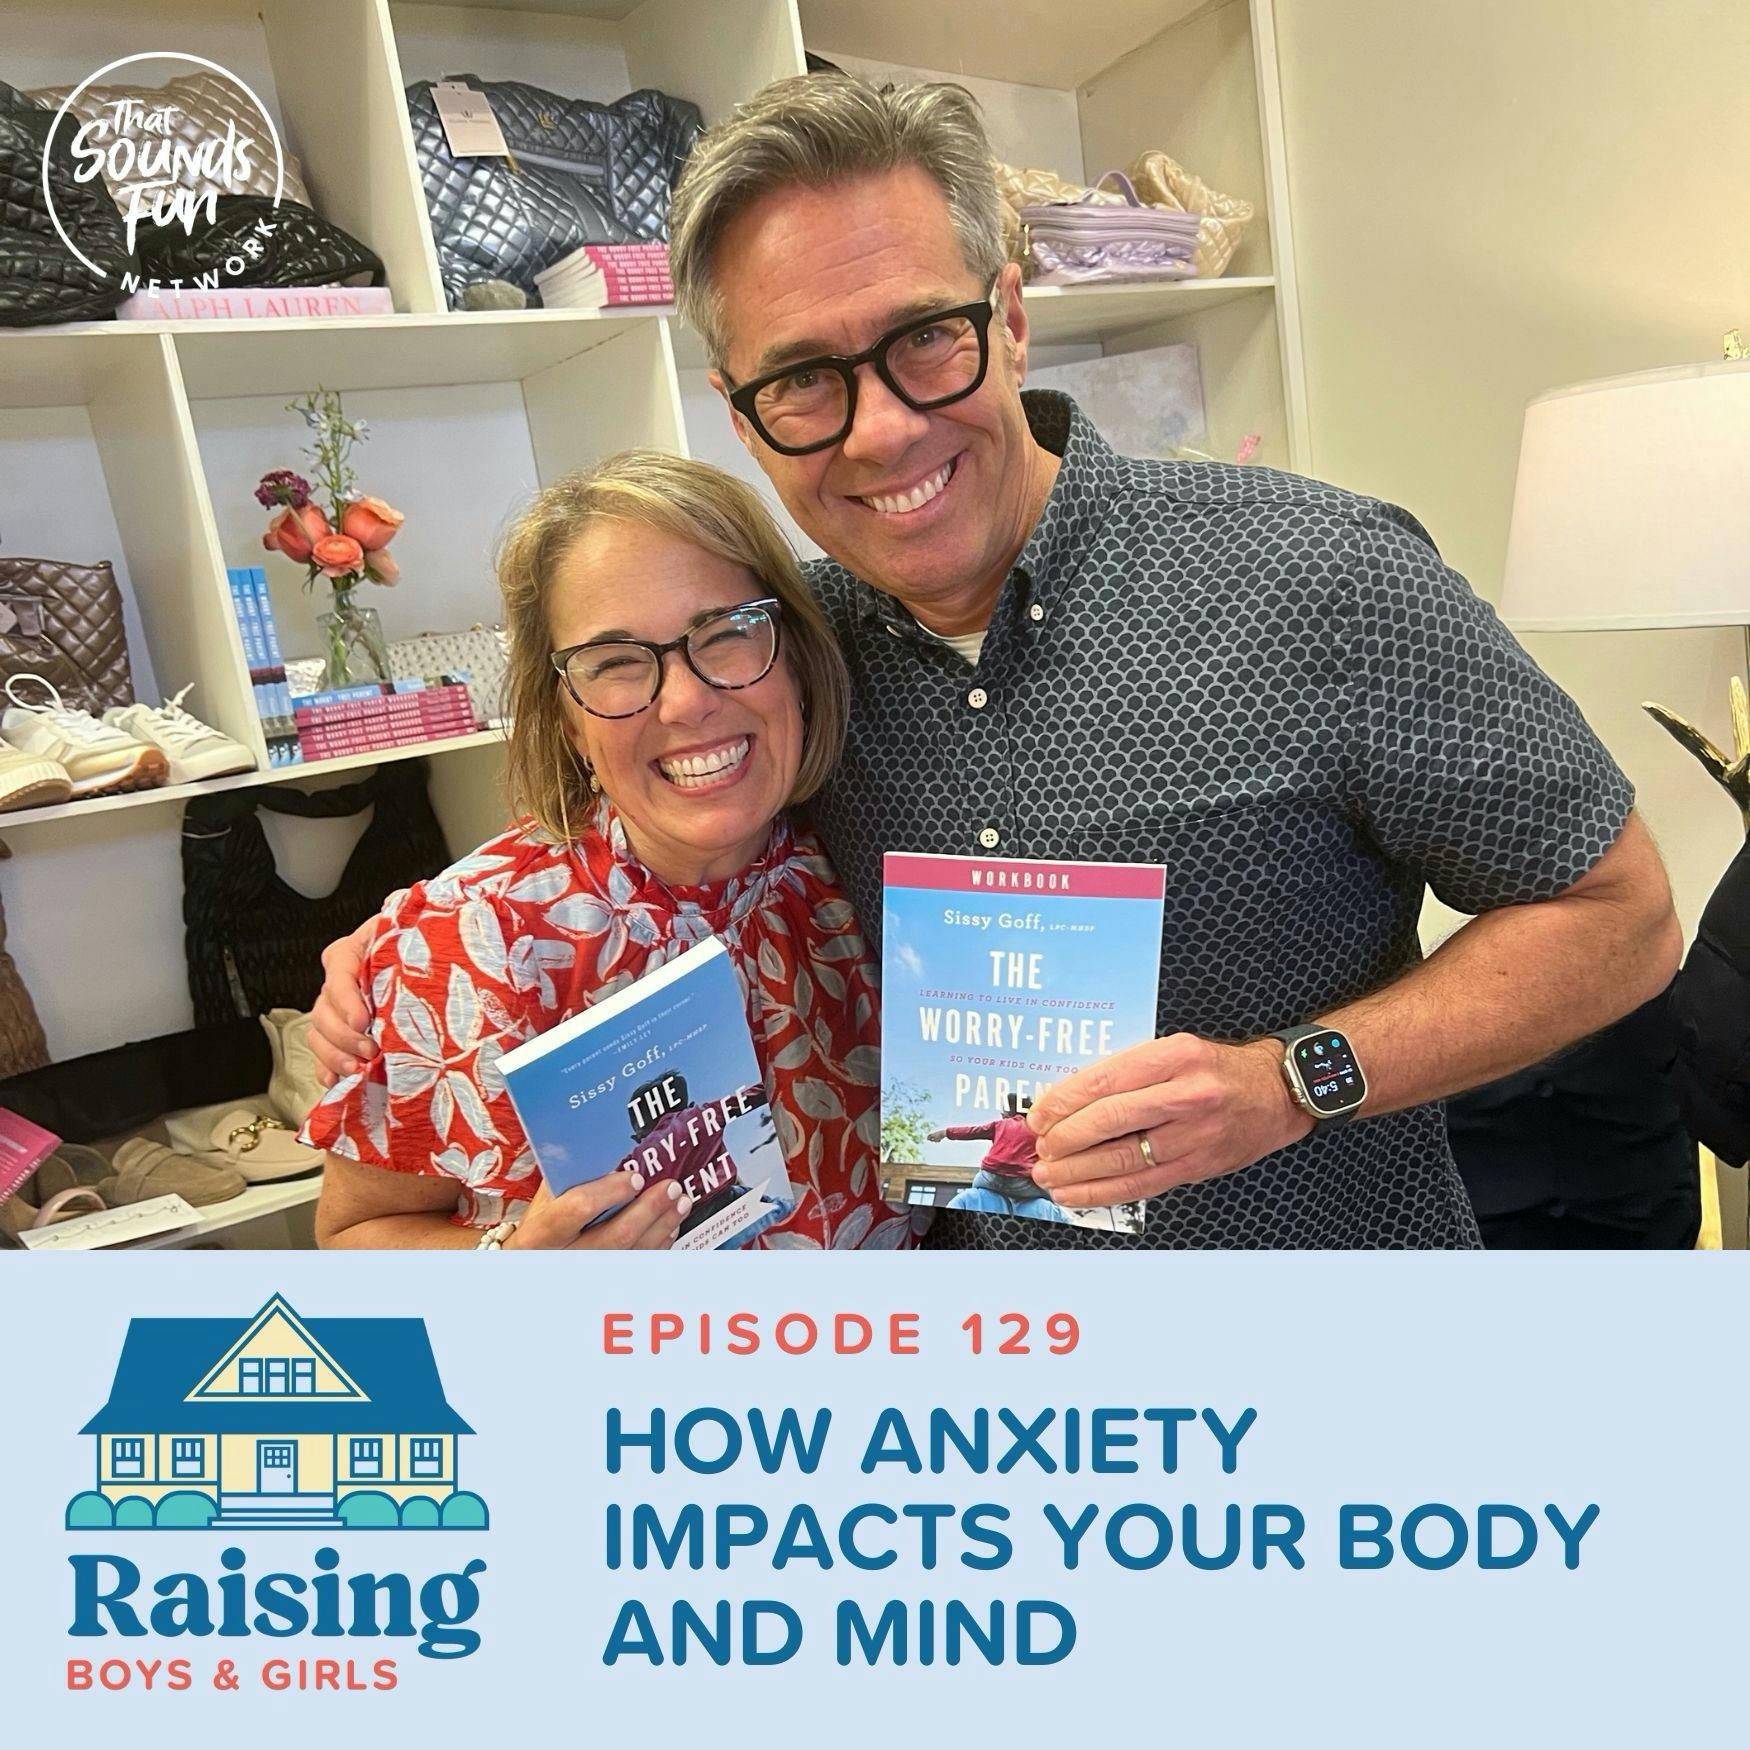 Episode 129: How Anxiety Impacts Your Body and Mind